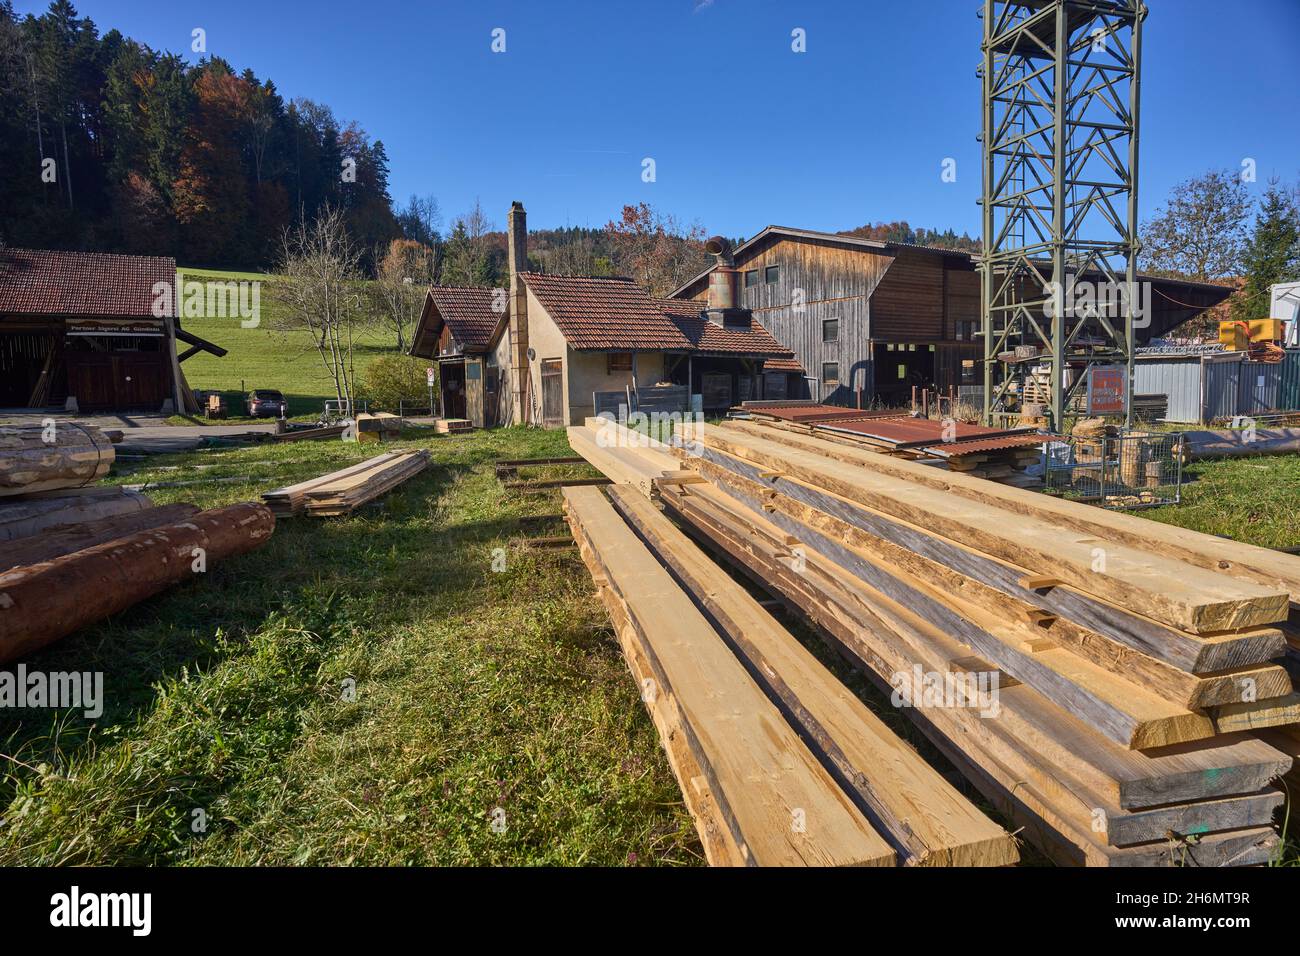 Outdoor Lumber Yard. In The Background Crane, Sawmill Building, Meadow, Forest And Blue Sky. Gündisau, Zurich Oberland, Switzerland Stock Photo